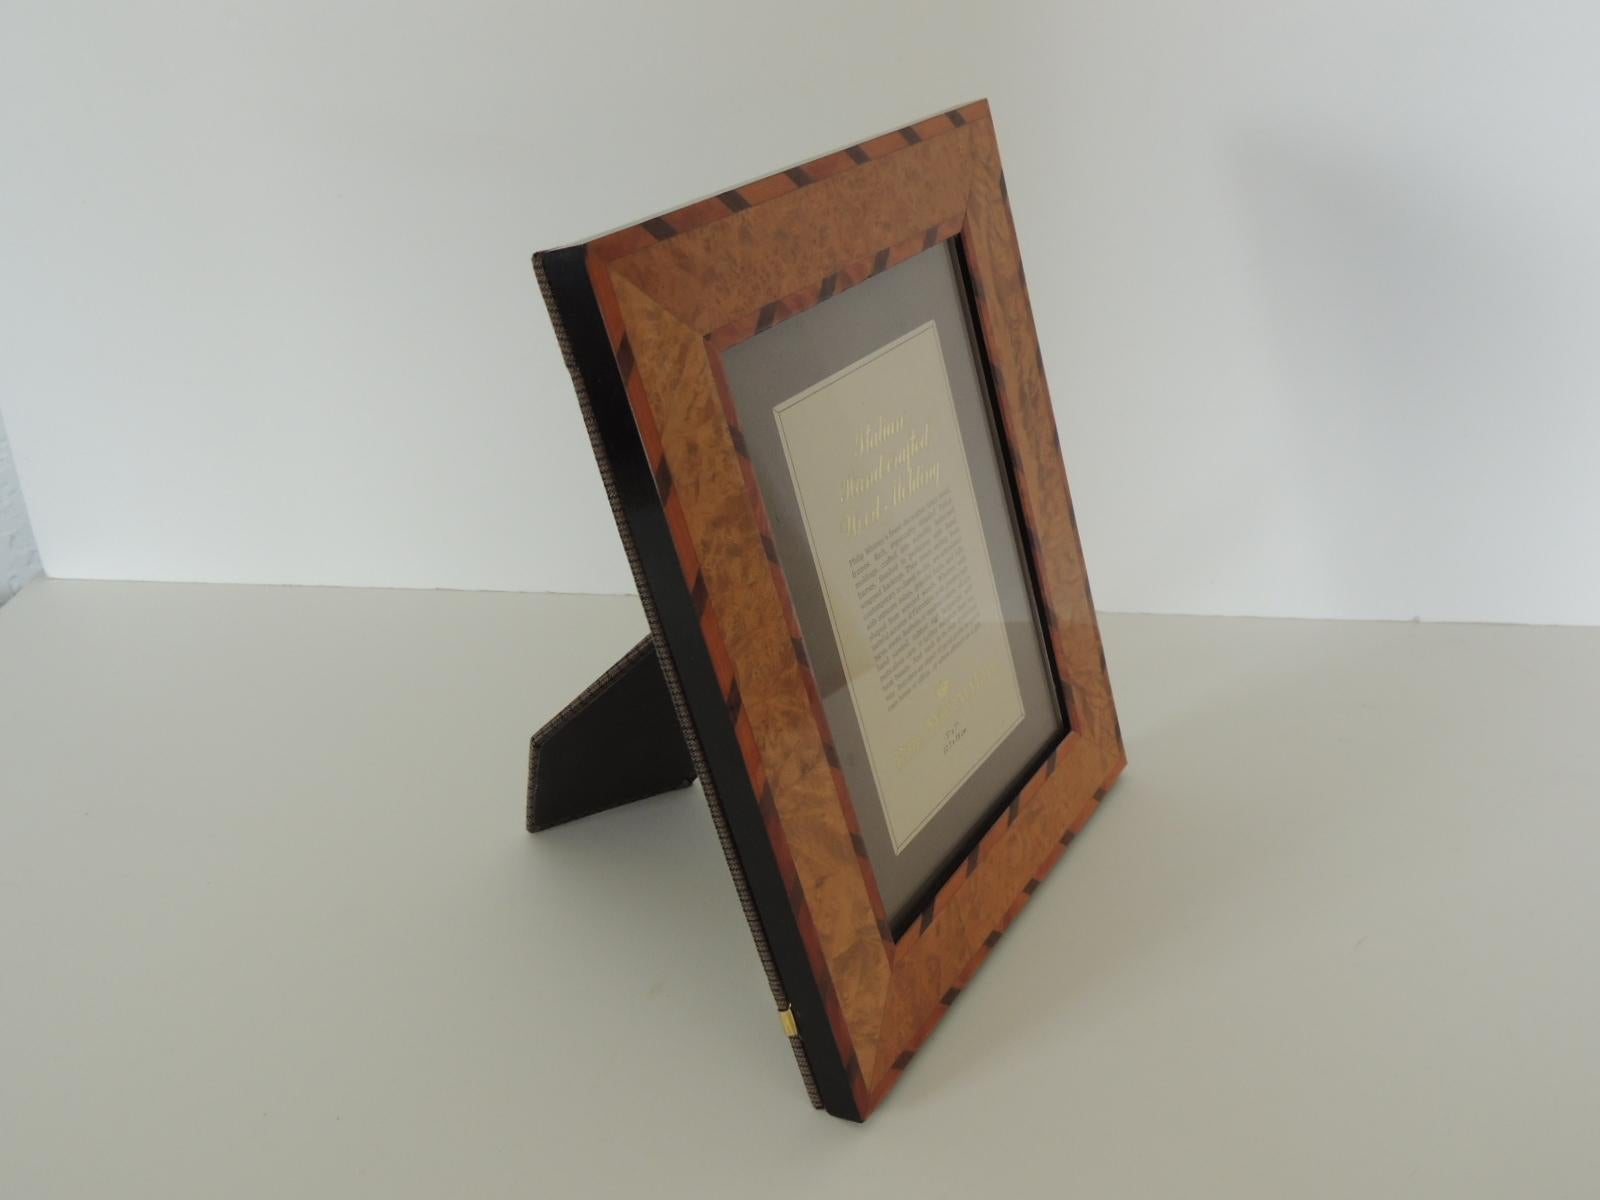 Regency Italian Handcrafted Inlaid Wood Picture Frame